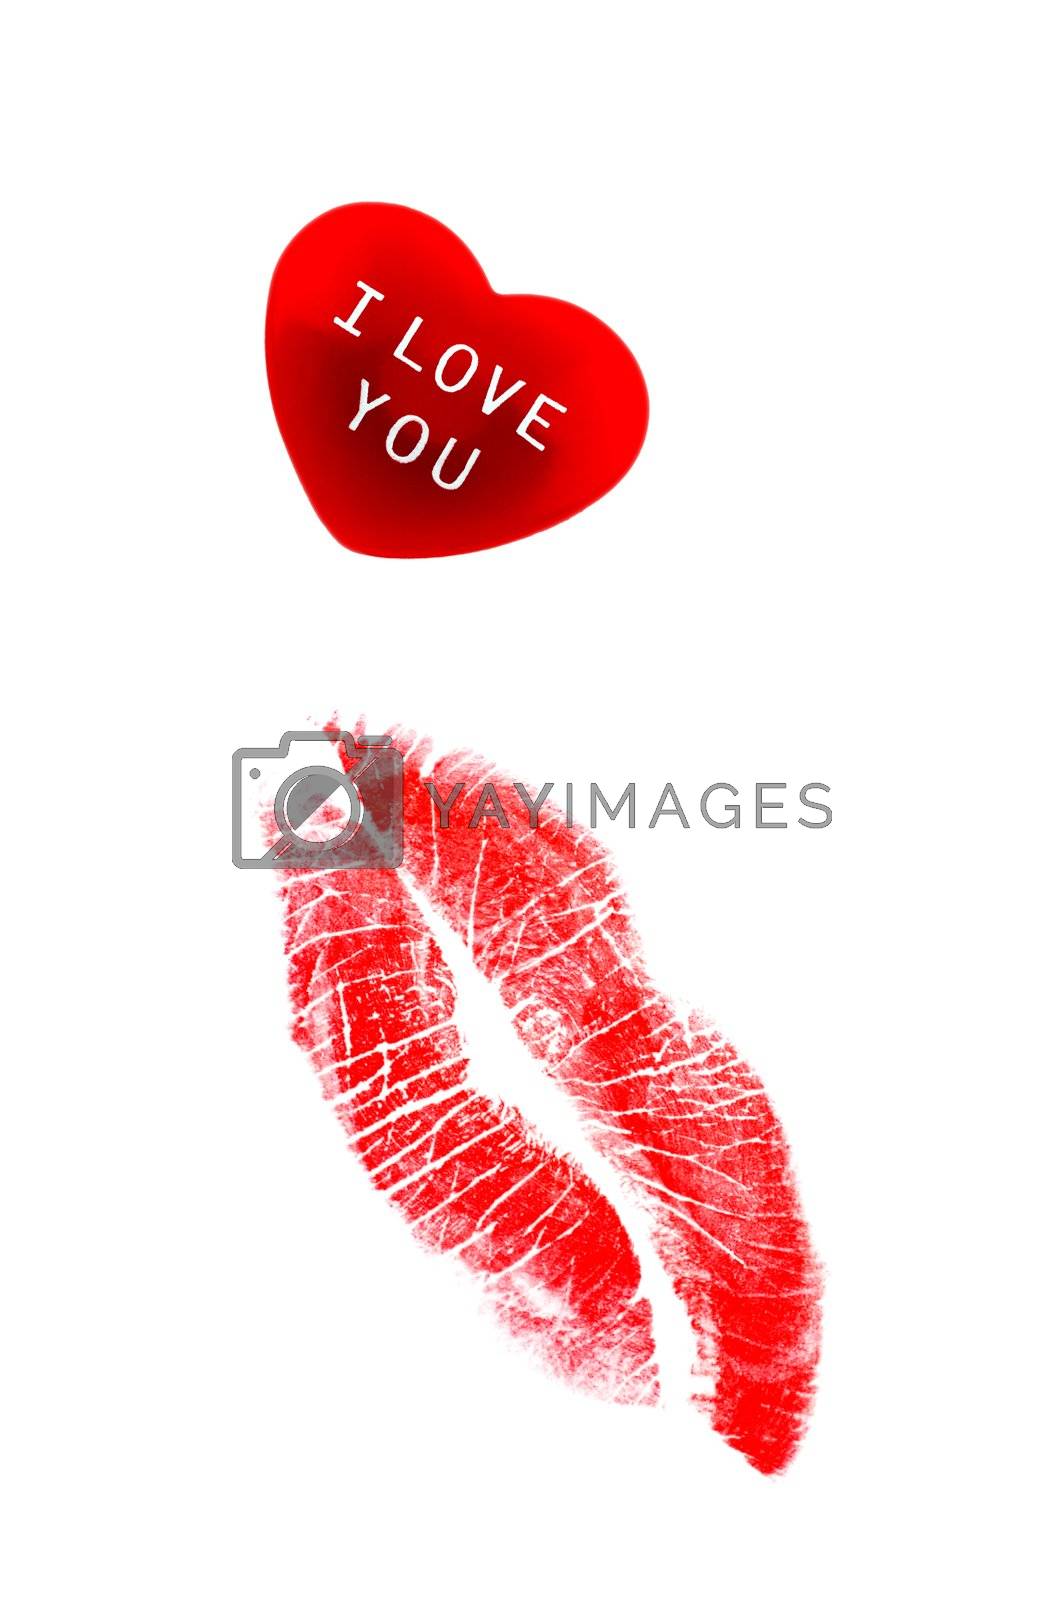 Royalty free image of Heart and lipstick kiss by sil